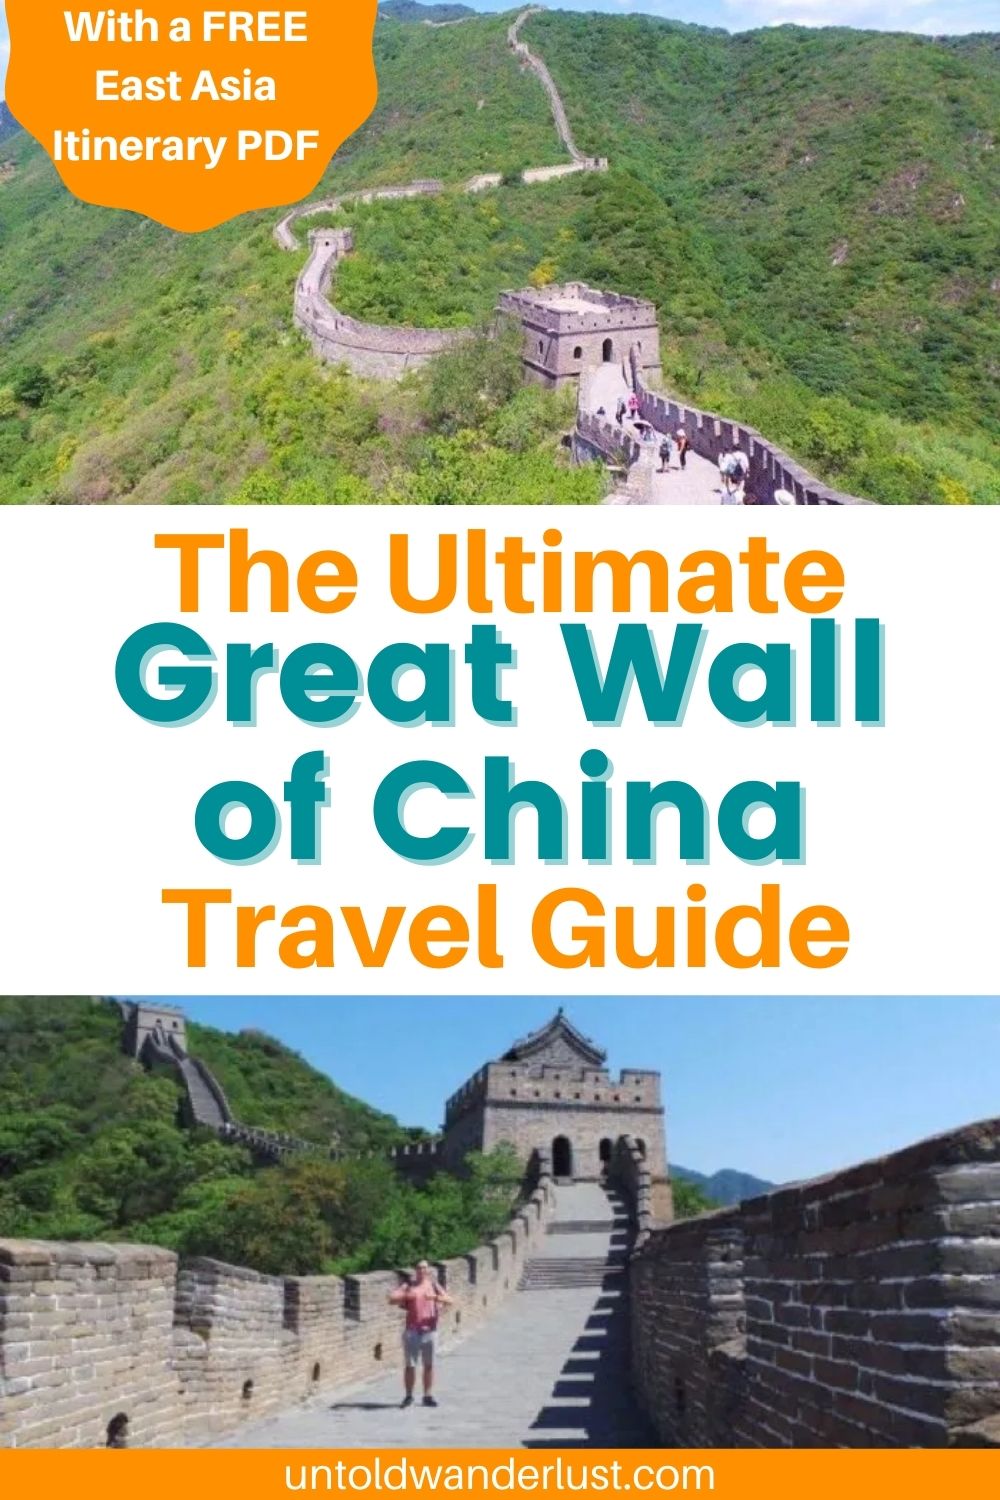 The Ultimate Great Wall of China Travel Guide